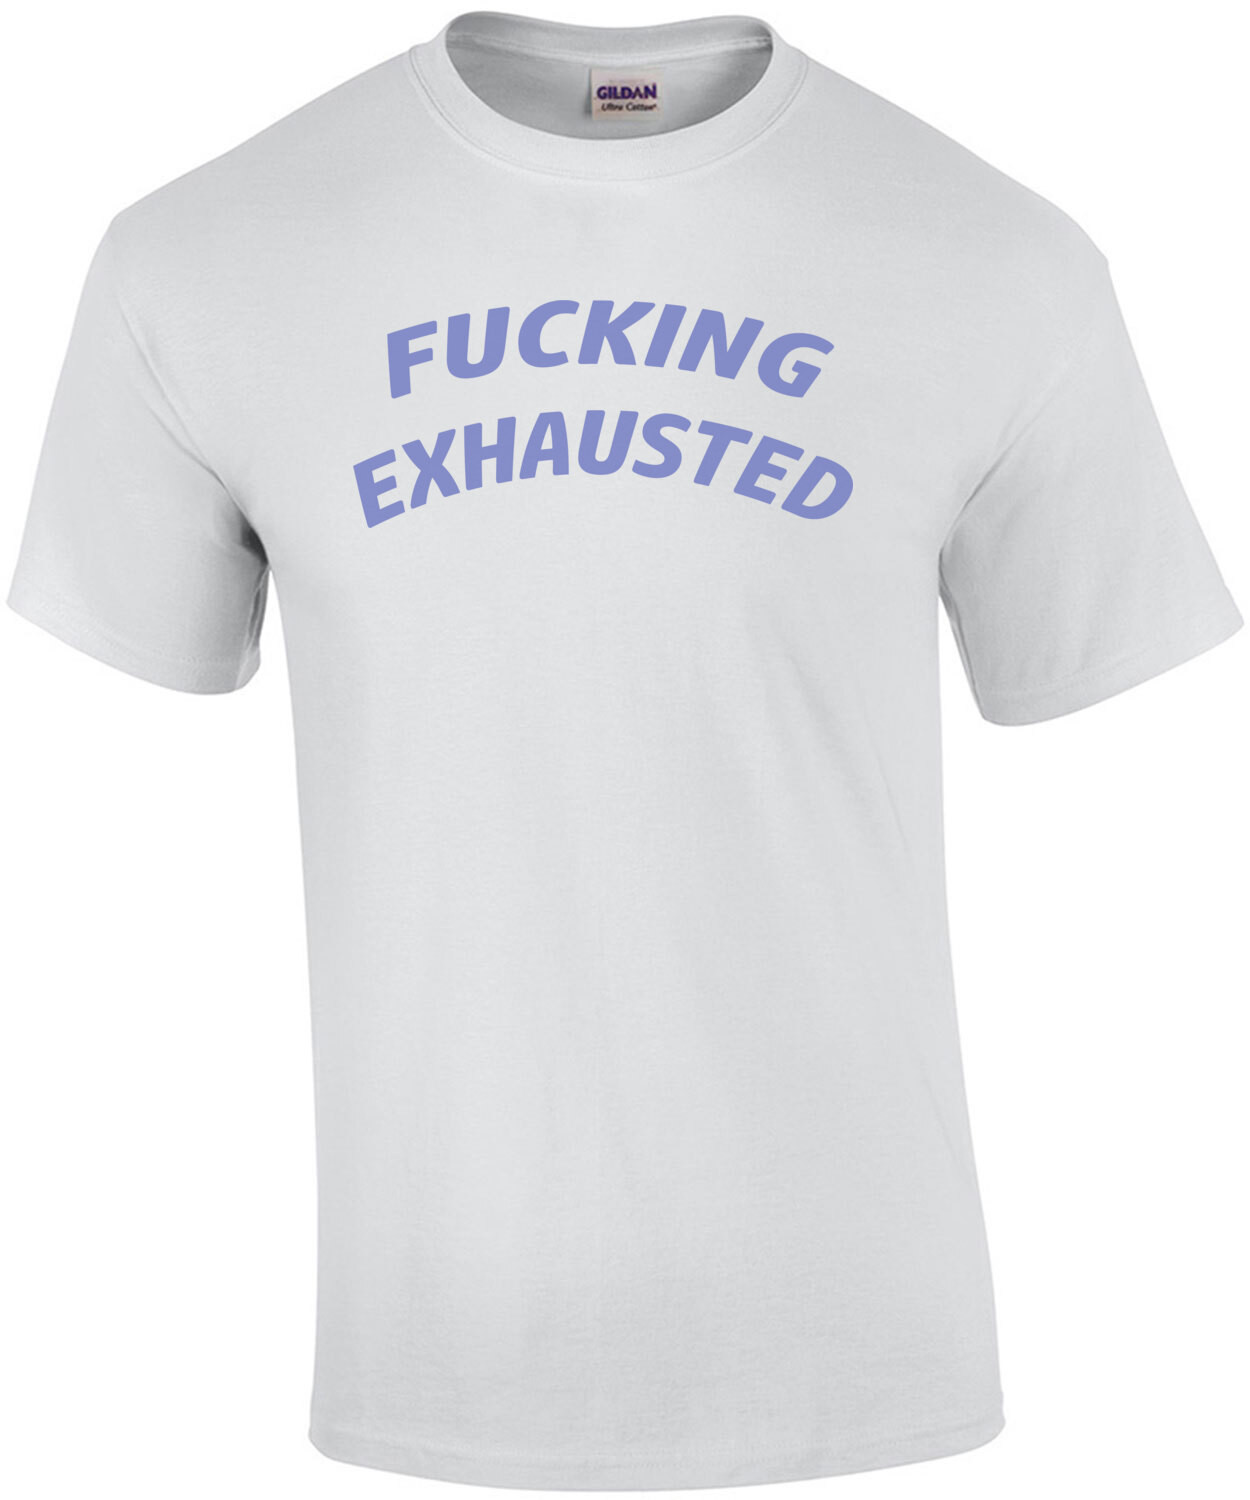 Fucking Exhausted - Funny T-Shirt